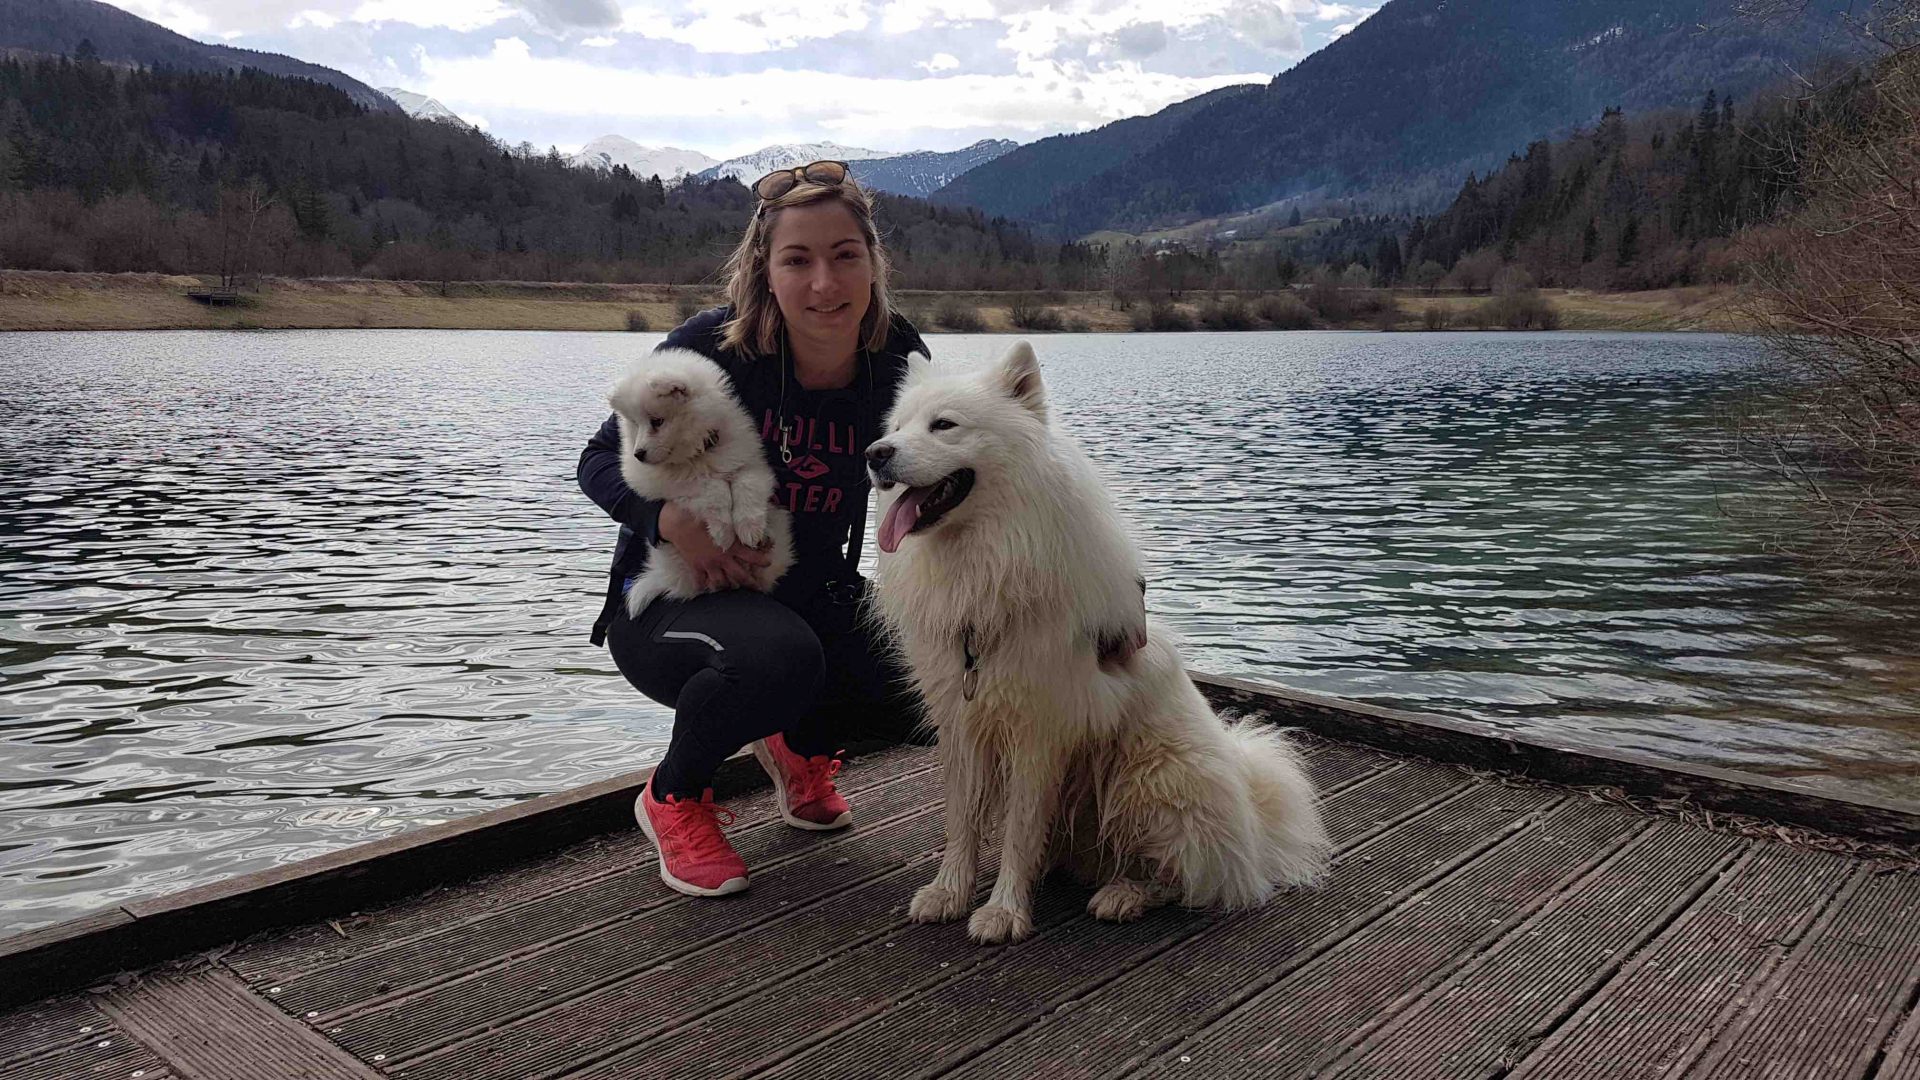 A vacation in the mountains with your dogs